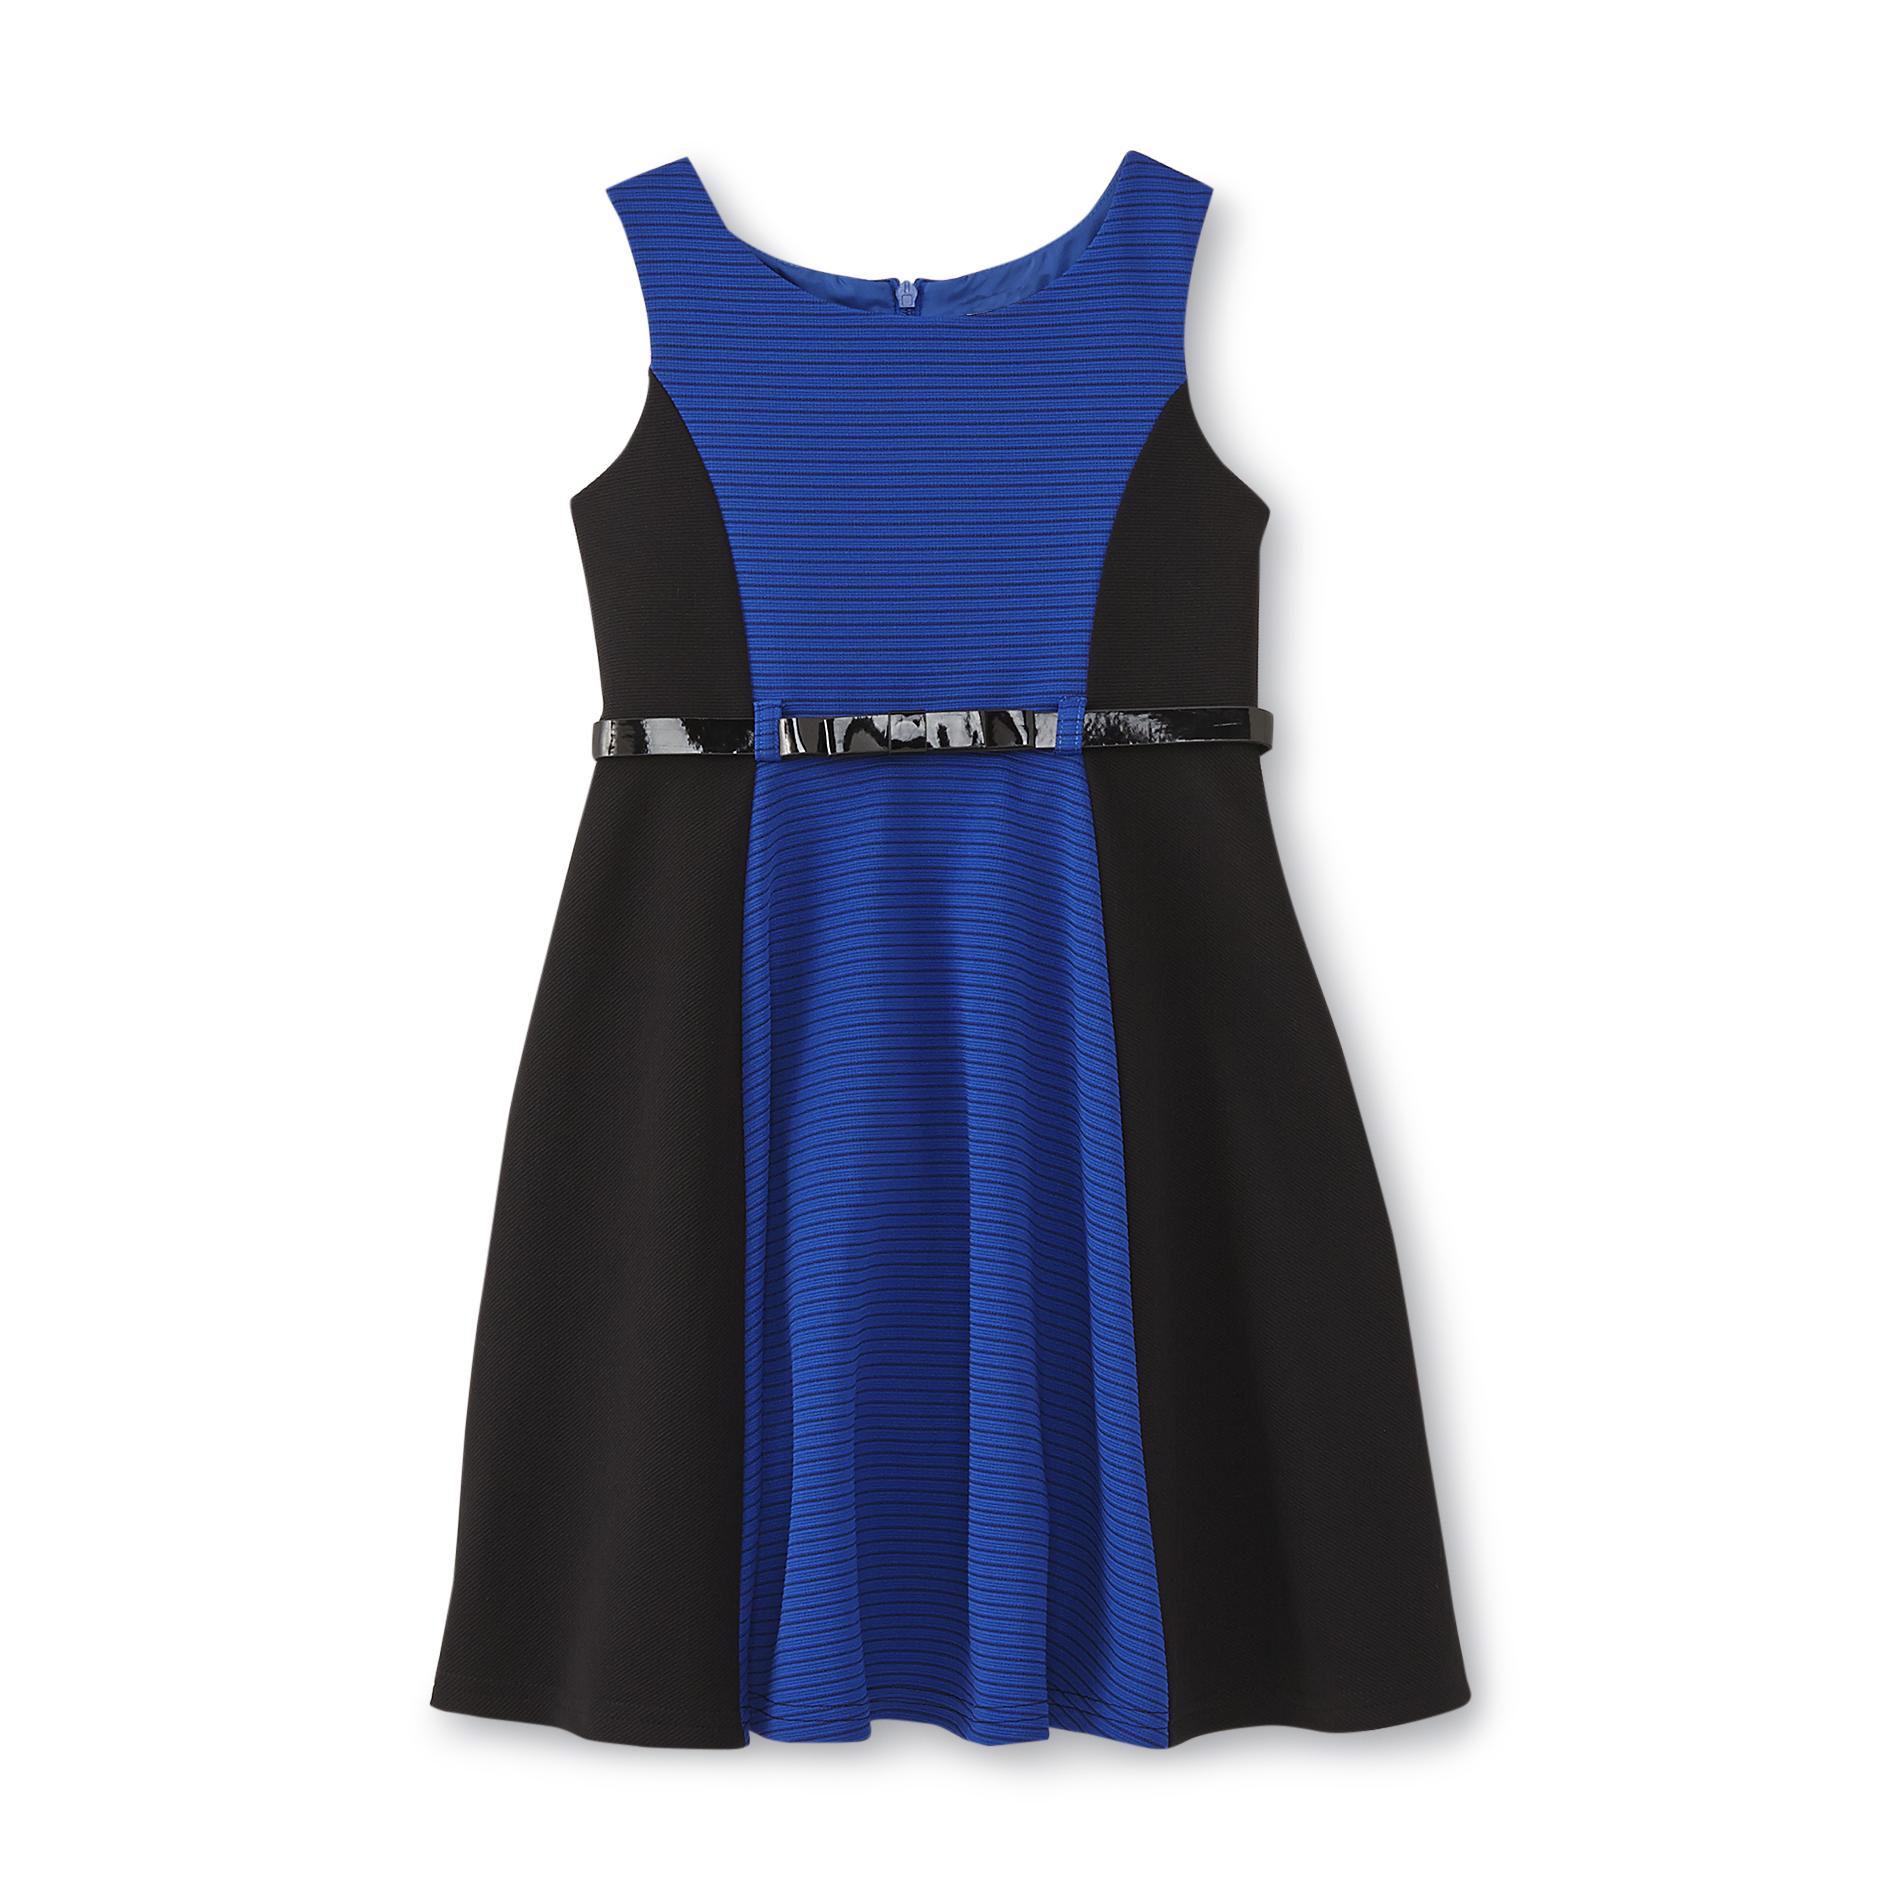 Youngland Girl's Belted Fit & Flare Dress - Striped